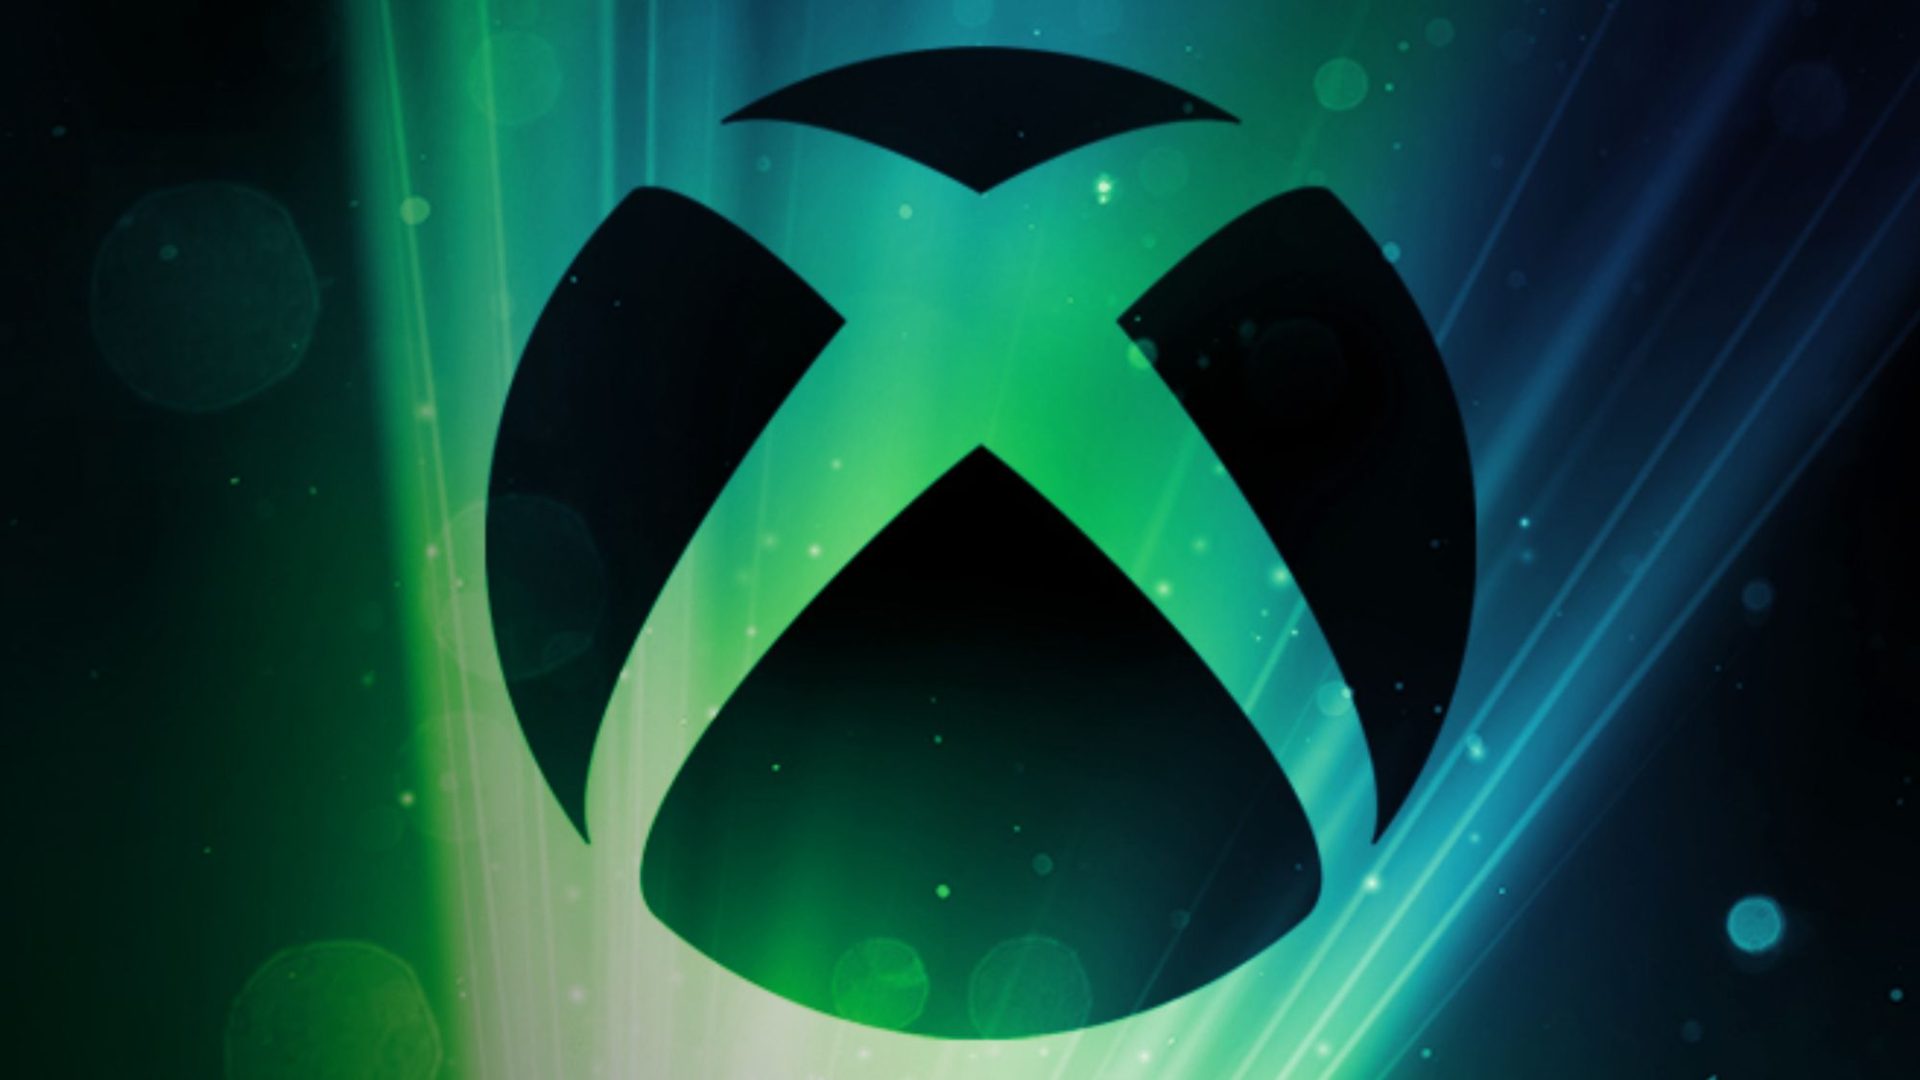 Microsoft confirms Xbox Game Showcase for June 9, along with an apparently Call of Duty-related “Redacted Direct”